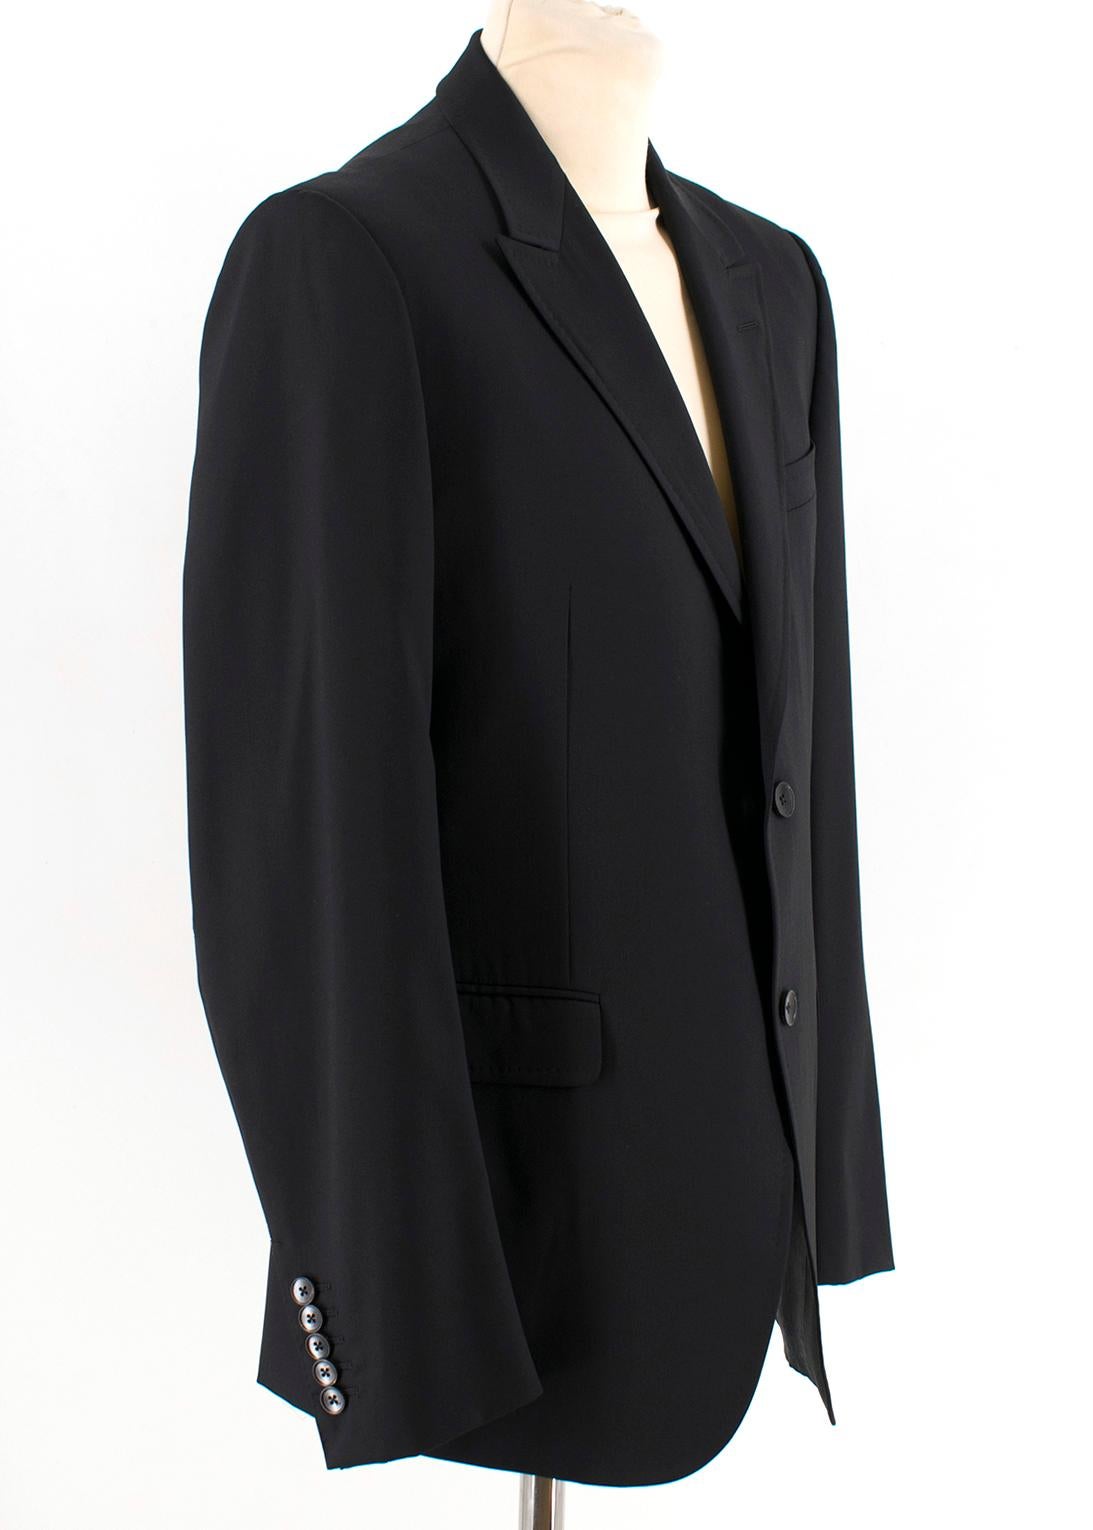 Gucci Black Wool Single Breasted Blazer

- Black single breasted blazer jacket
- Long sleeves
- Front flap pockets,
- Front chest welt pocket
- Padded shoulders
- Standard notch lapel collar
- Single back vent
- Button up cuffs

Please note, these